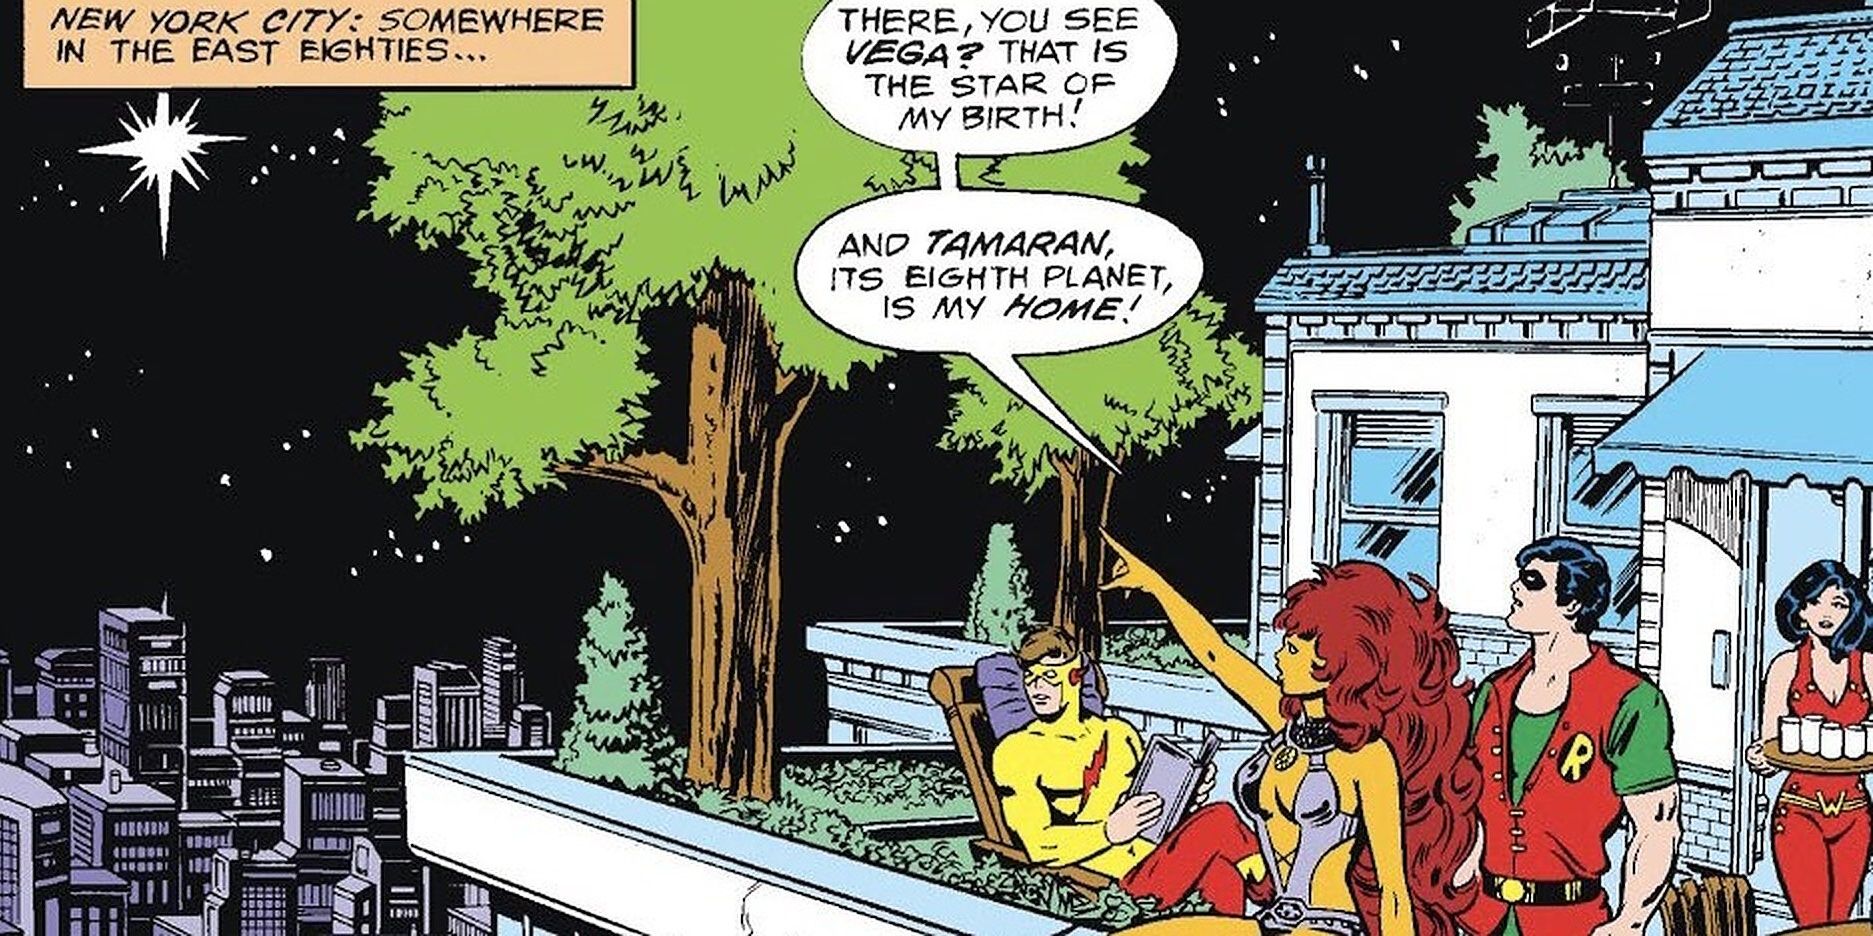 Starfire talks about her home planet